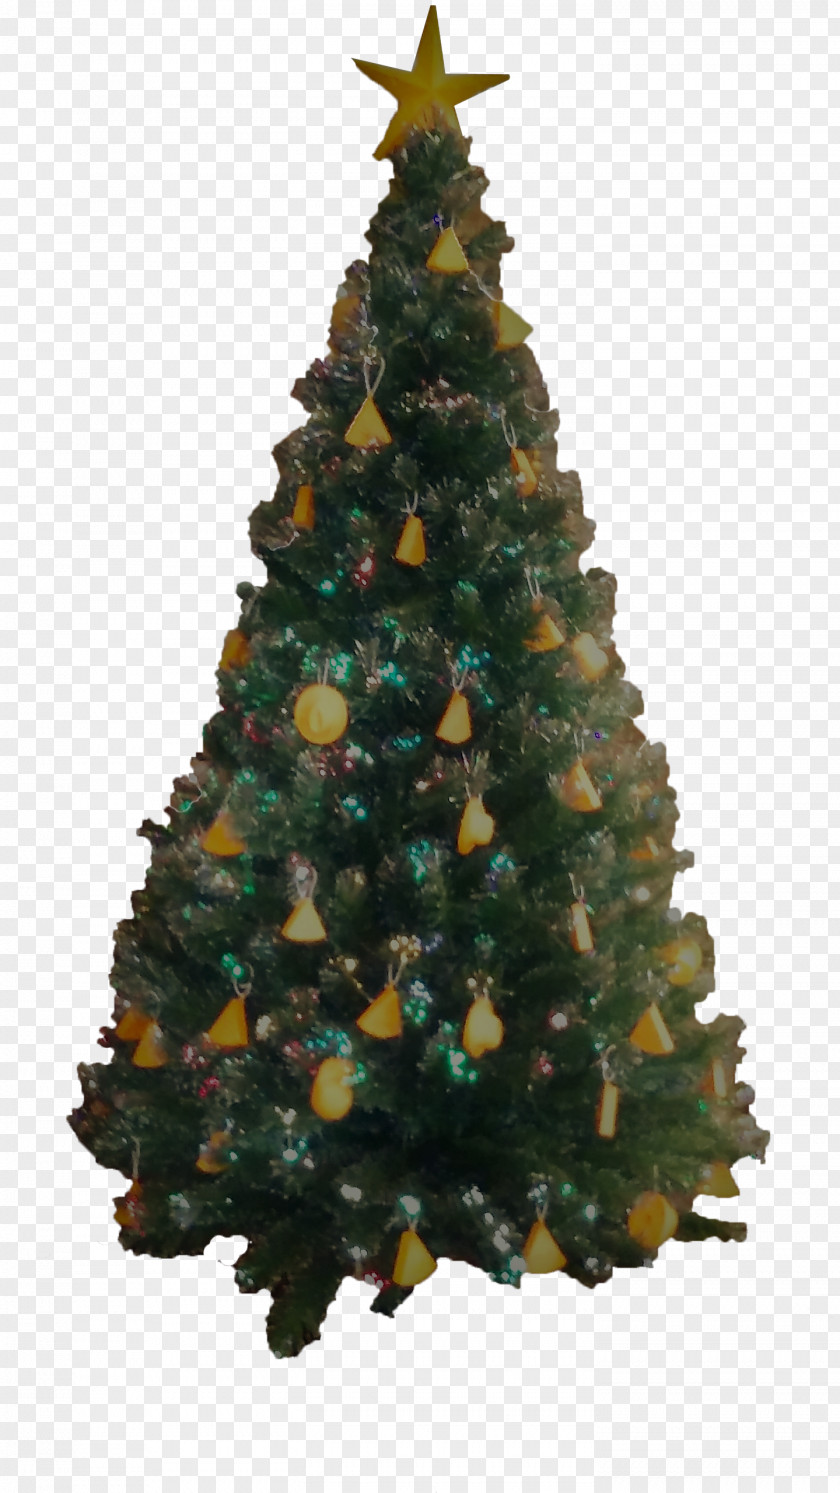 Christmas Tree Artificial Ornament Pre-lit Lights PNG